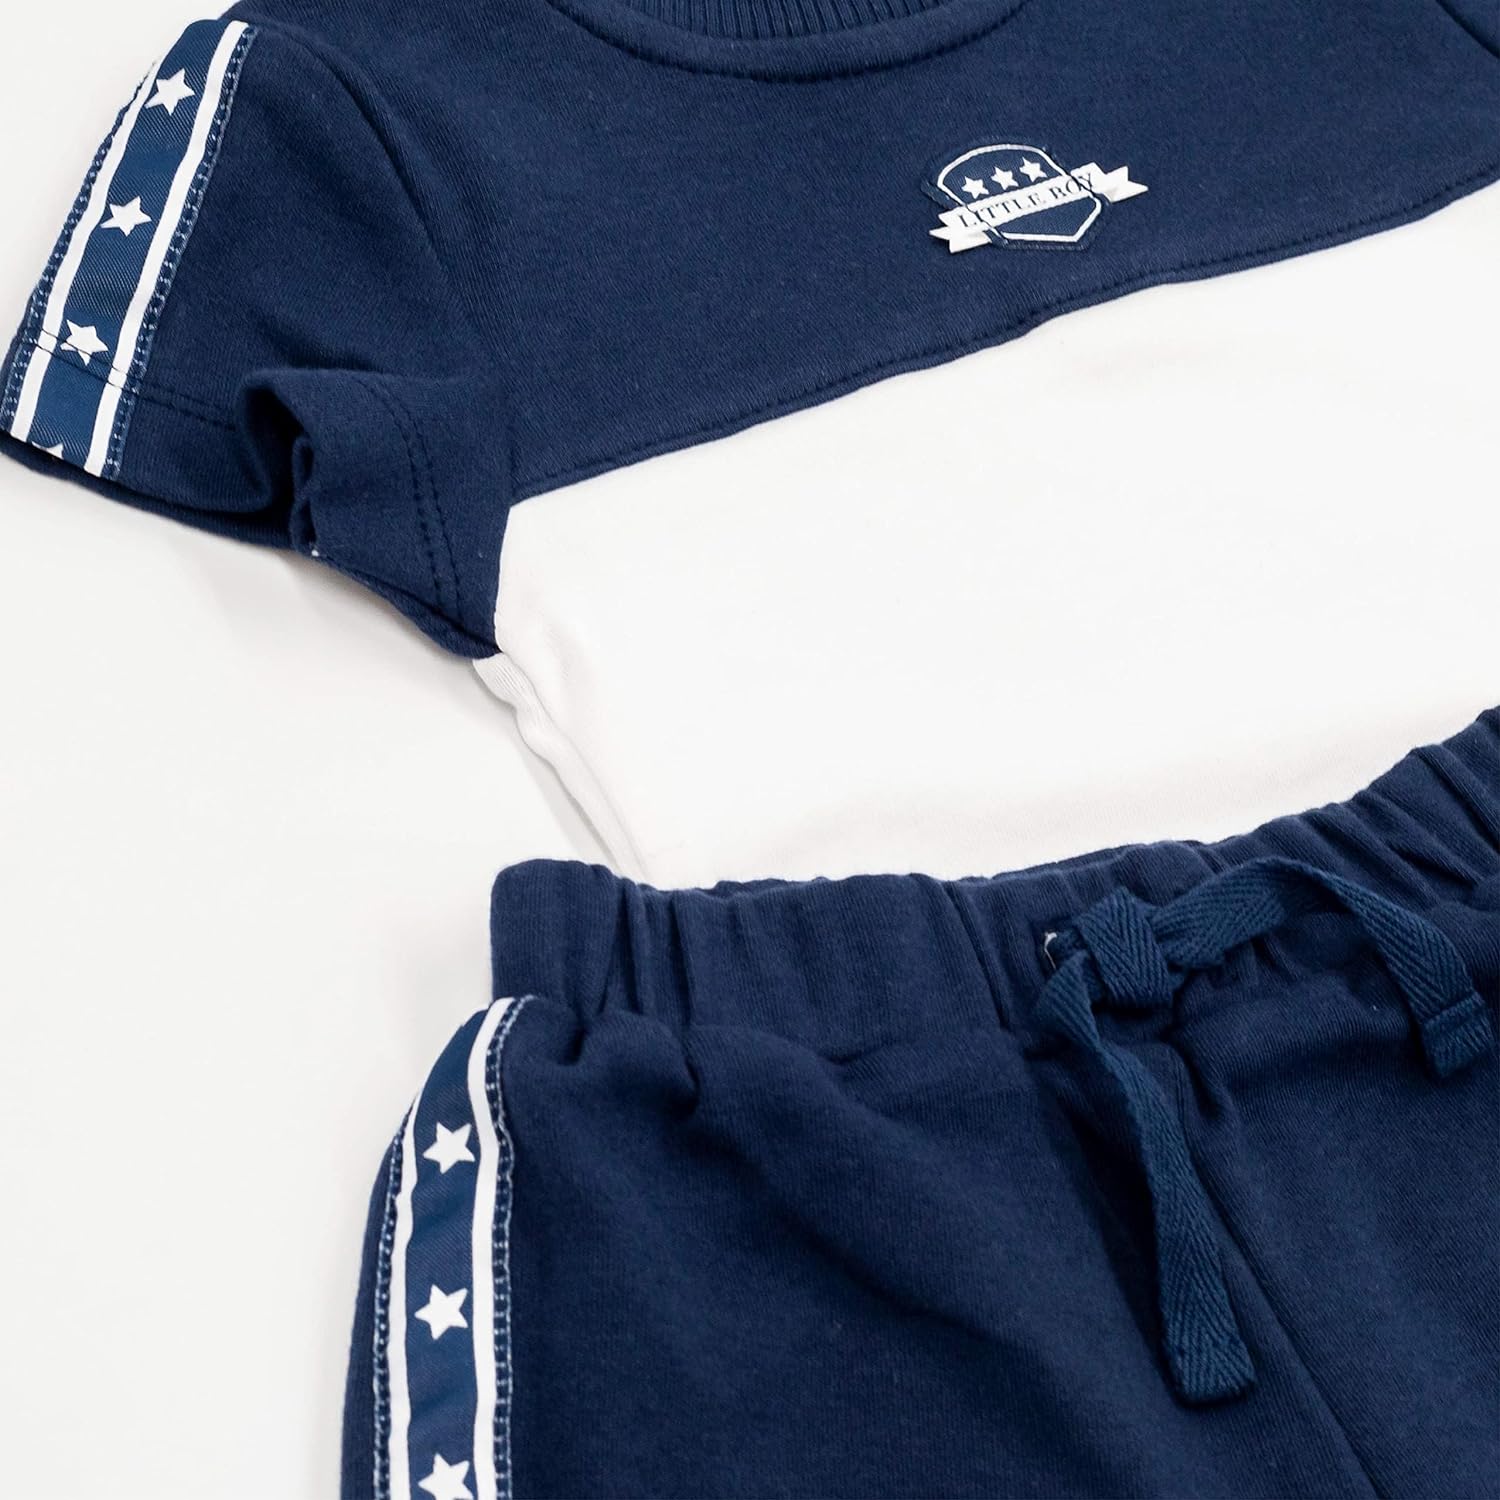 MOON 100% Cotton Polo T-shirt & pull on shorts 3-6M Blue - Navy Sports